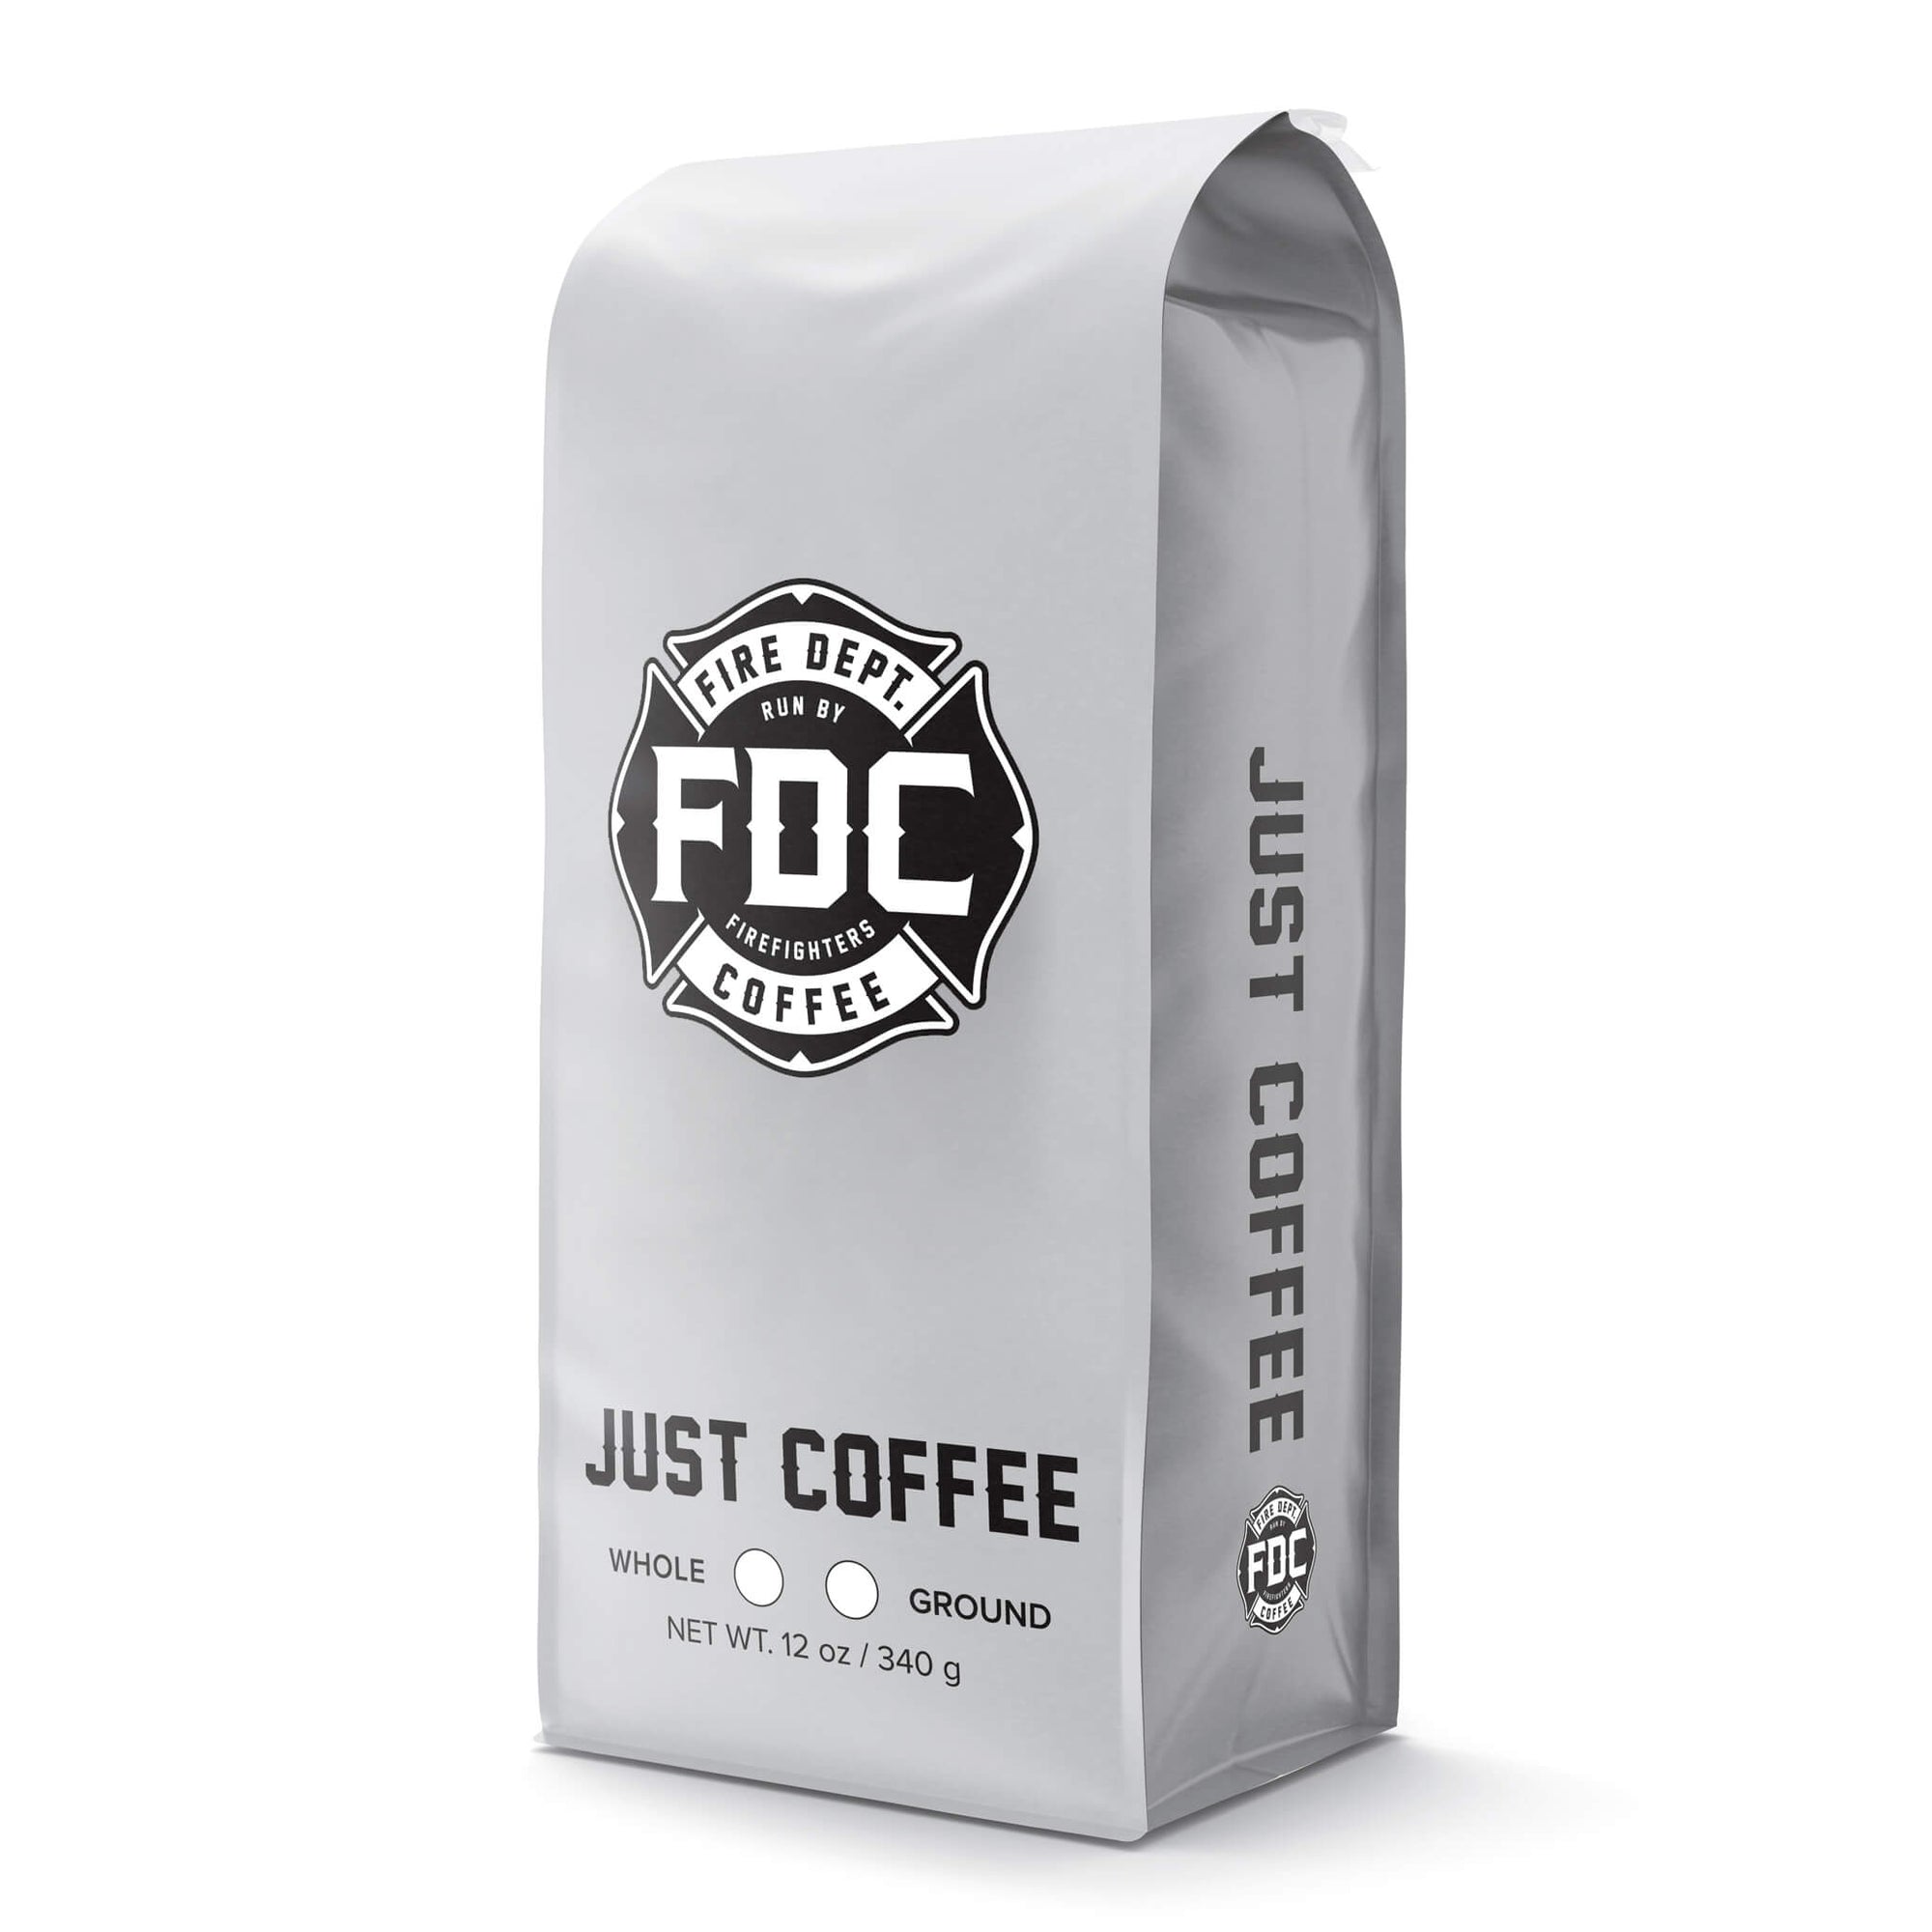 Fire Dept. Coffee's 12 ounce Just Coffee in a rectangular package